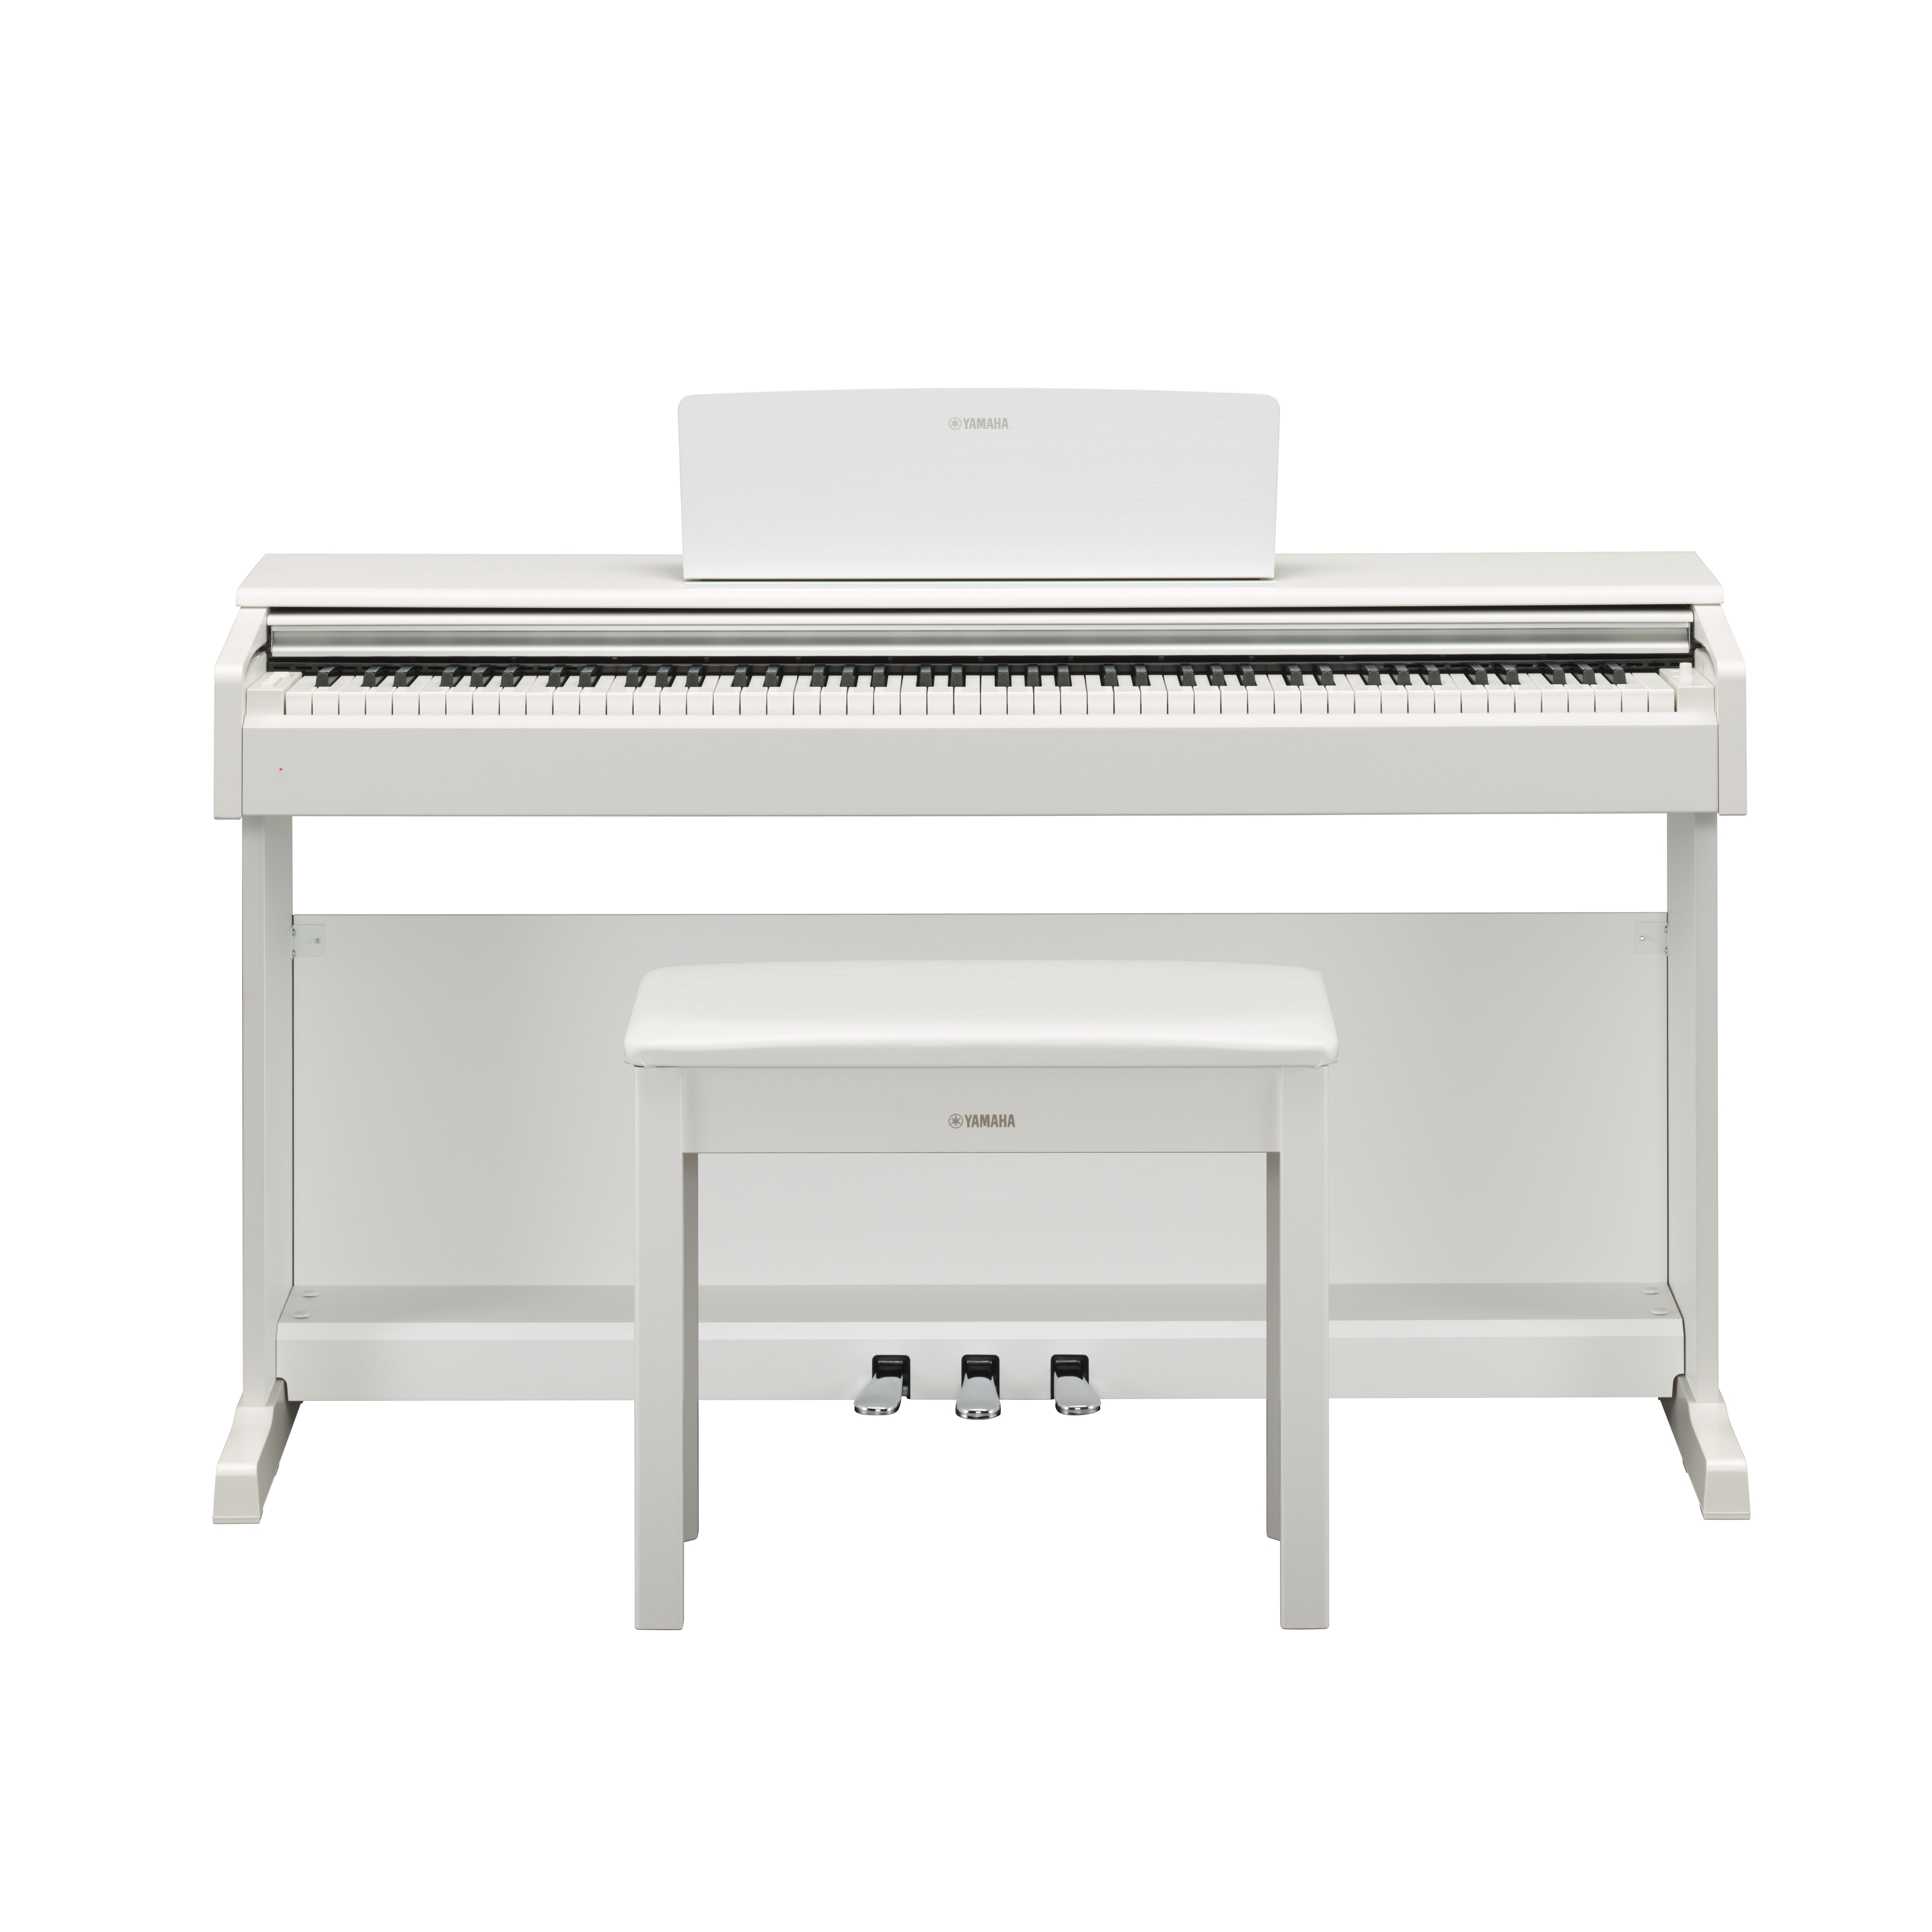 YDP-144 - Overview - ARIUS - Pianos - Musical Instruments 